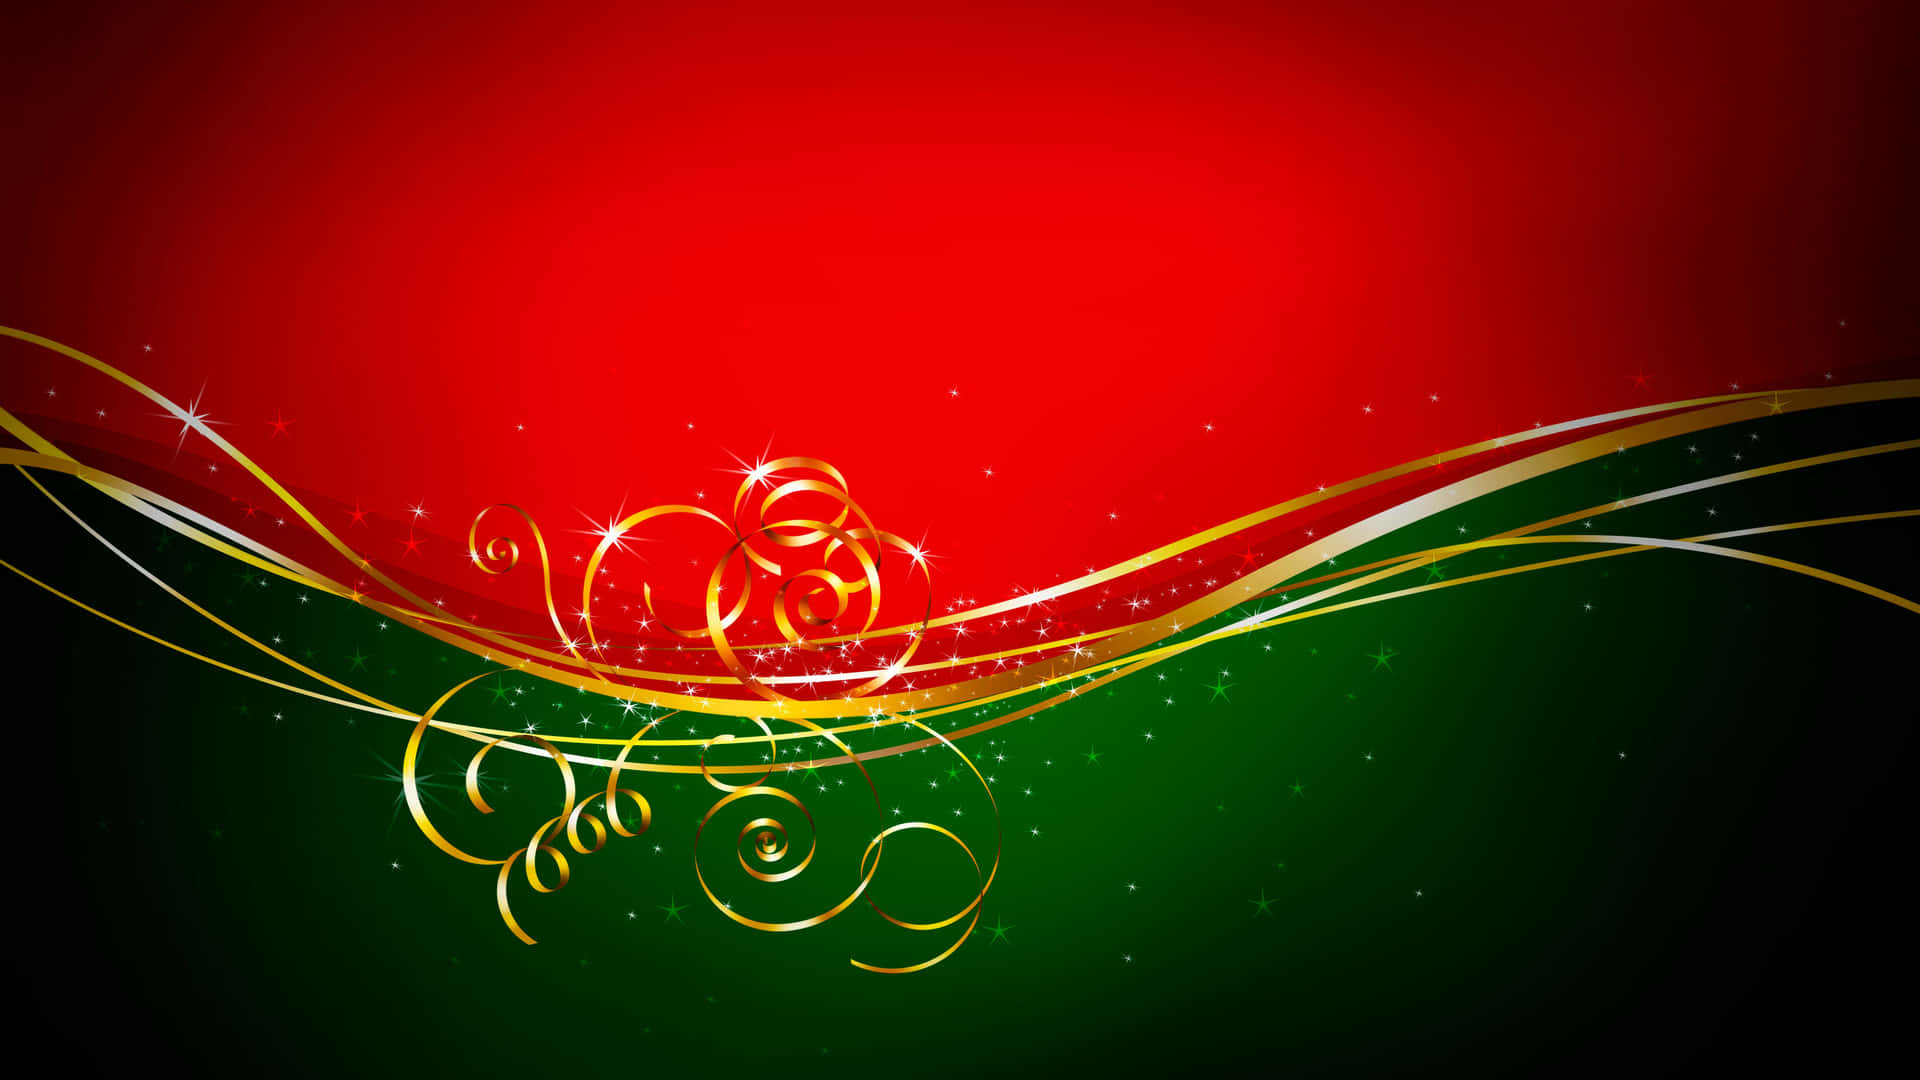 Enjoy the festive Red and Green of Christmas Wallpaper